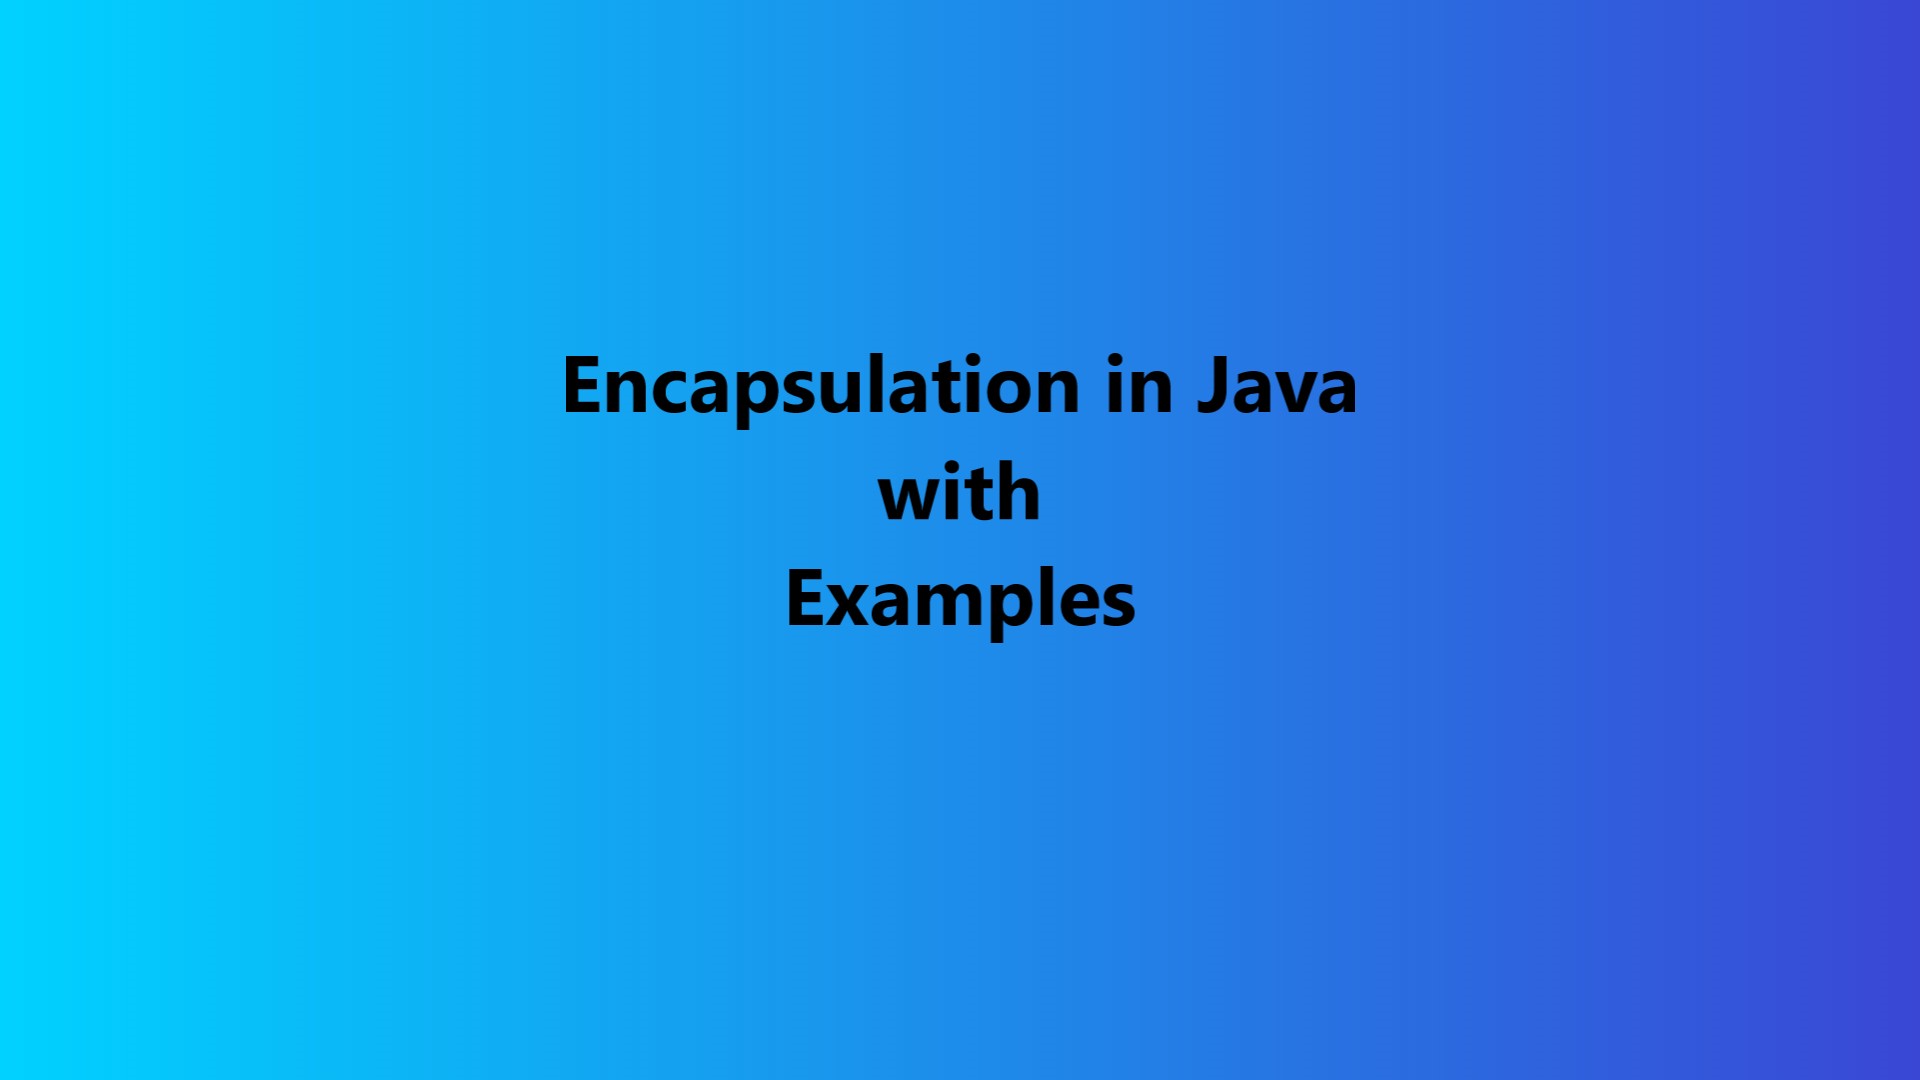 Encapsulation in Java with Examples